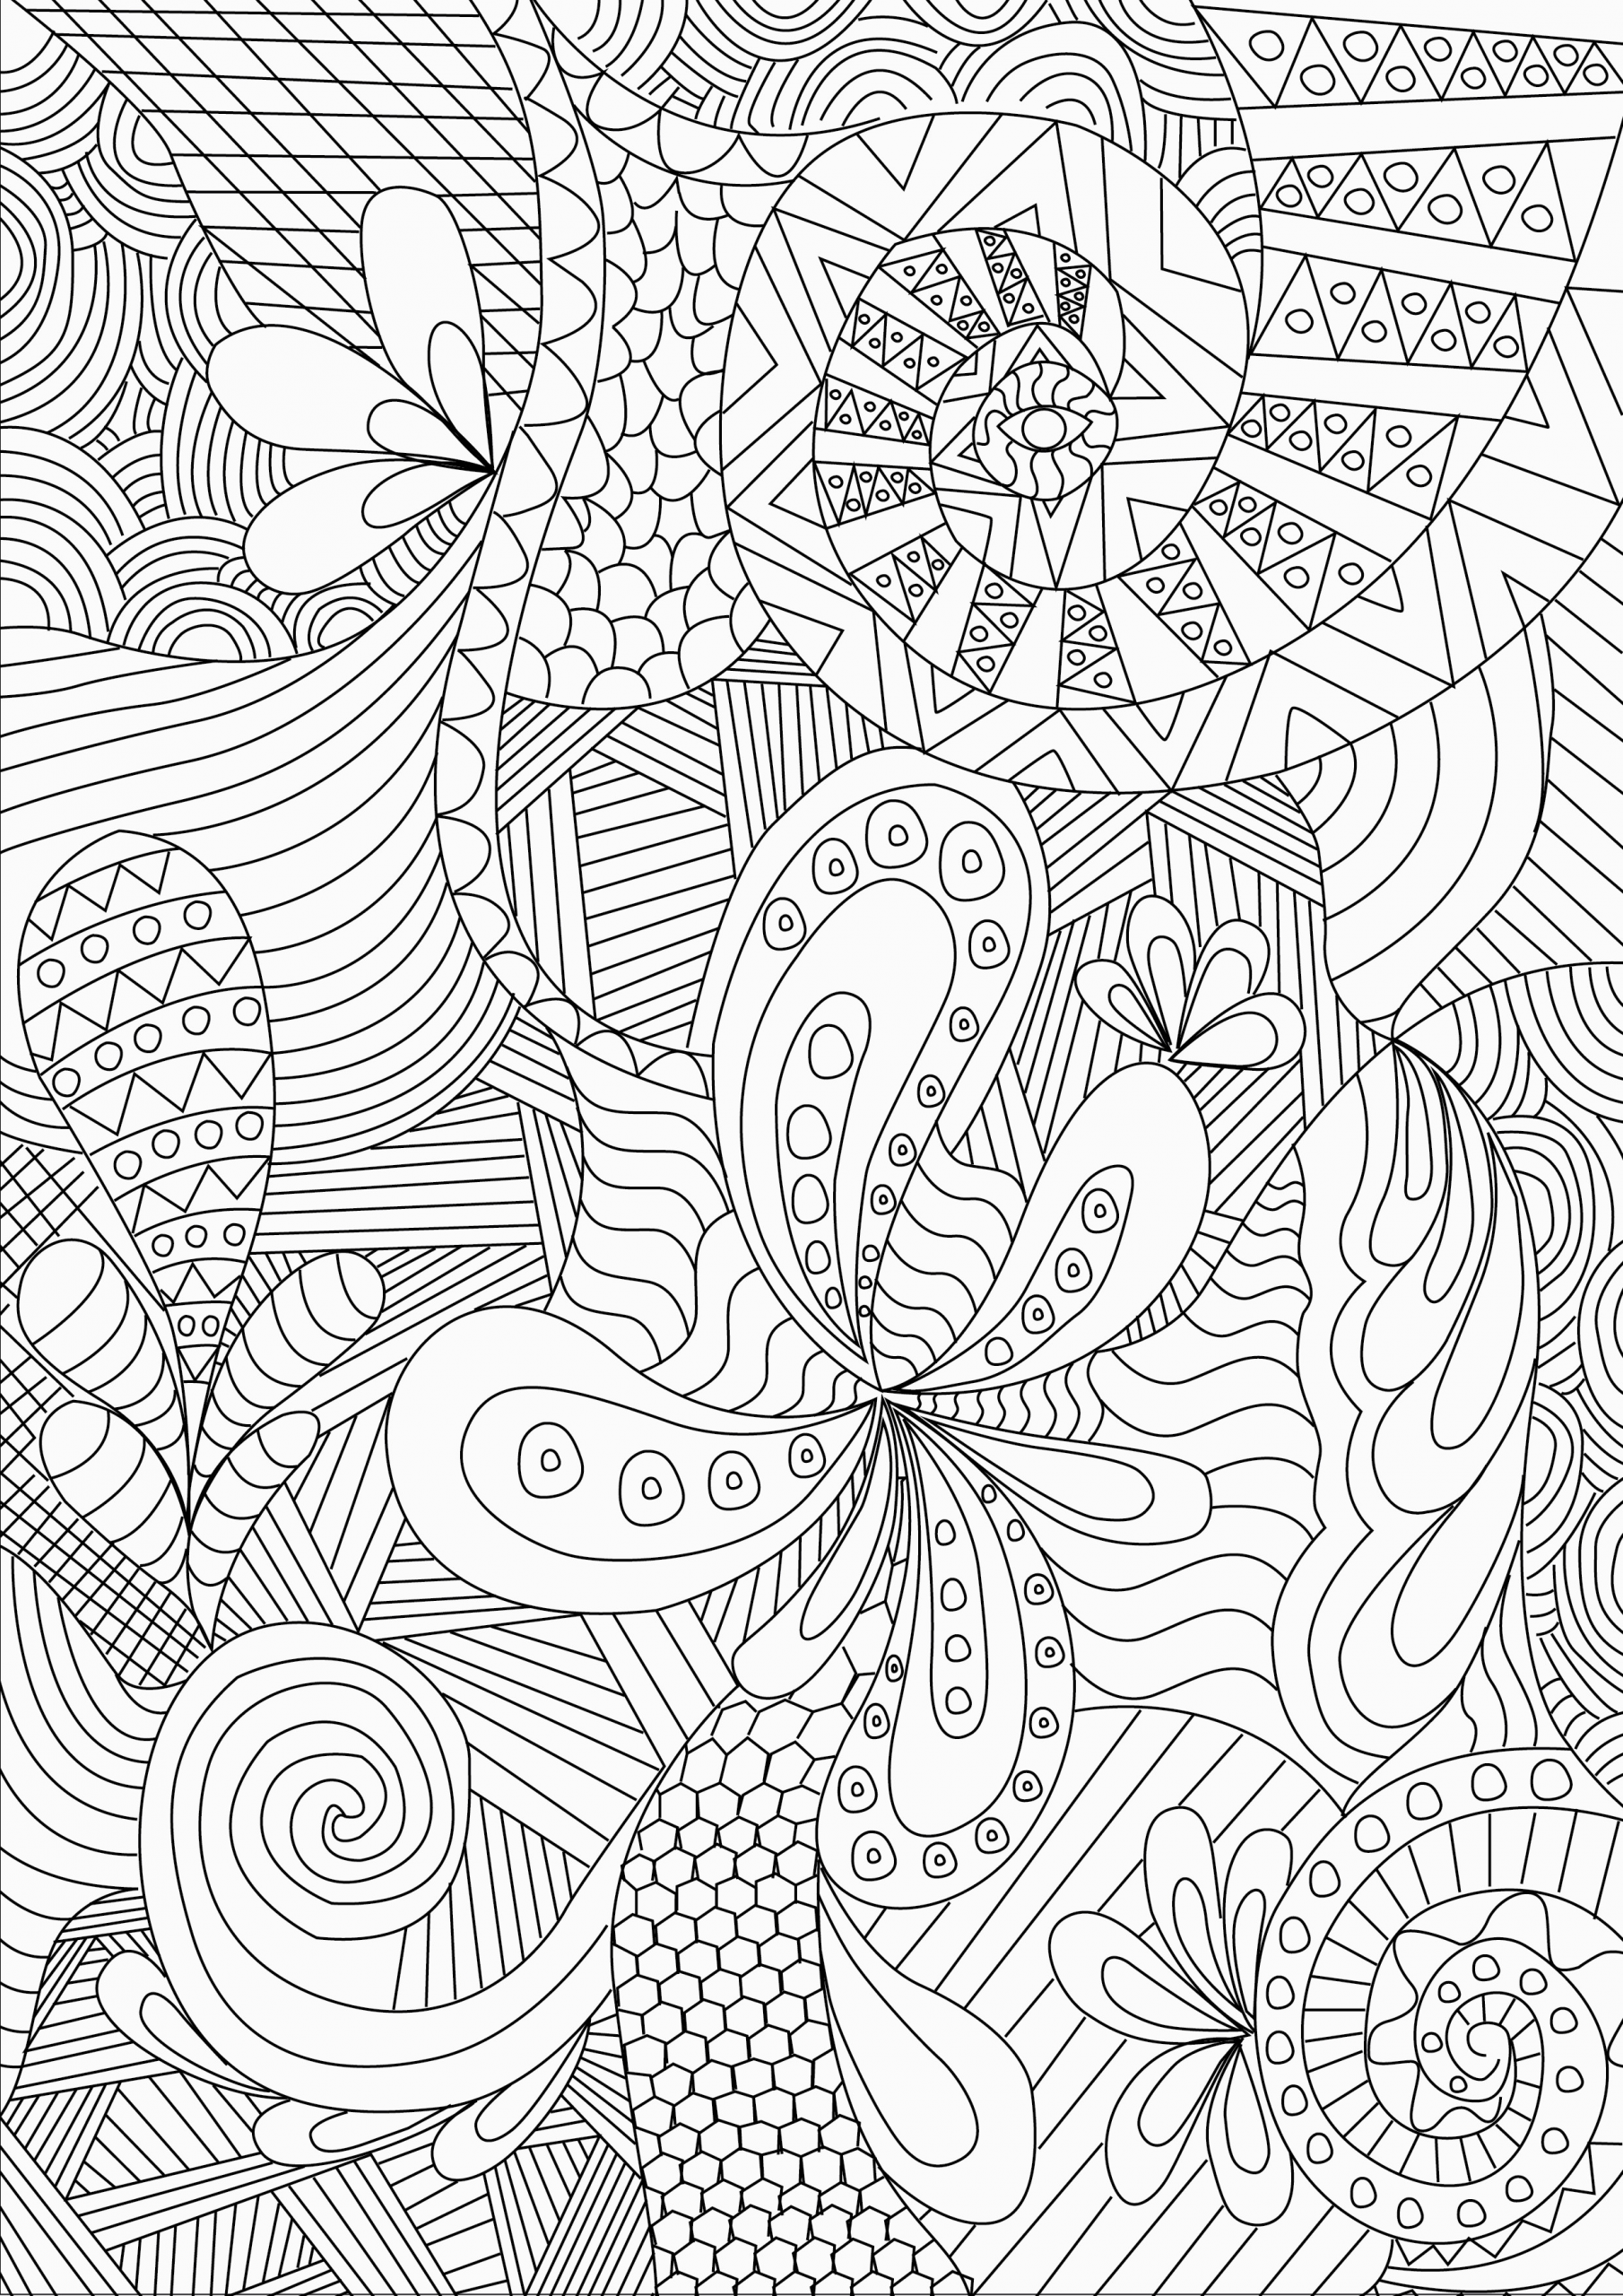 Coloring Pages For Adults Patterns
 Zentangle Colouring Pages In The Playroom